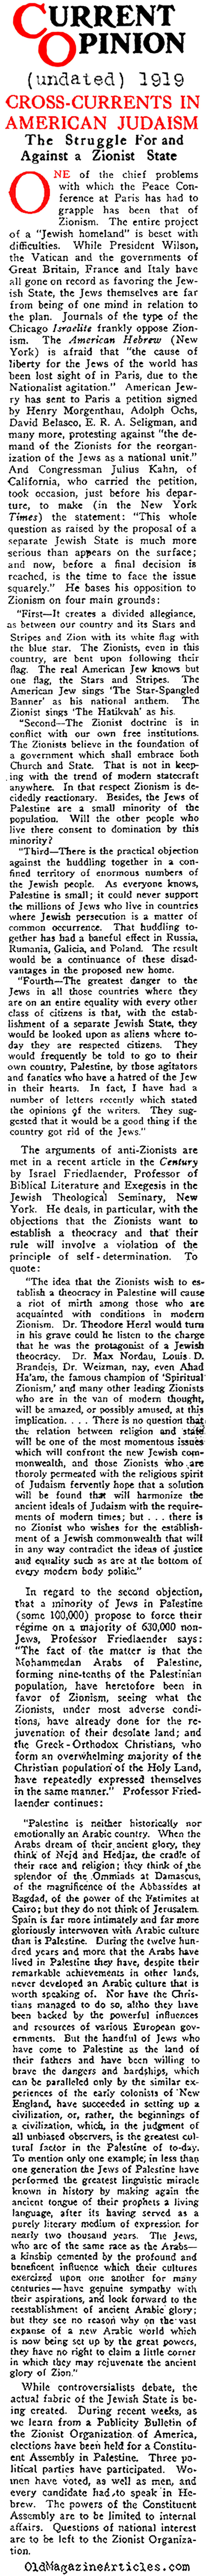 Arguments For and Against a Jewish State (Current Opinion, 1919)